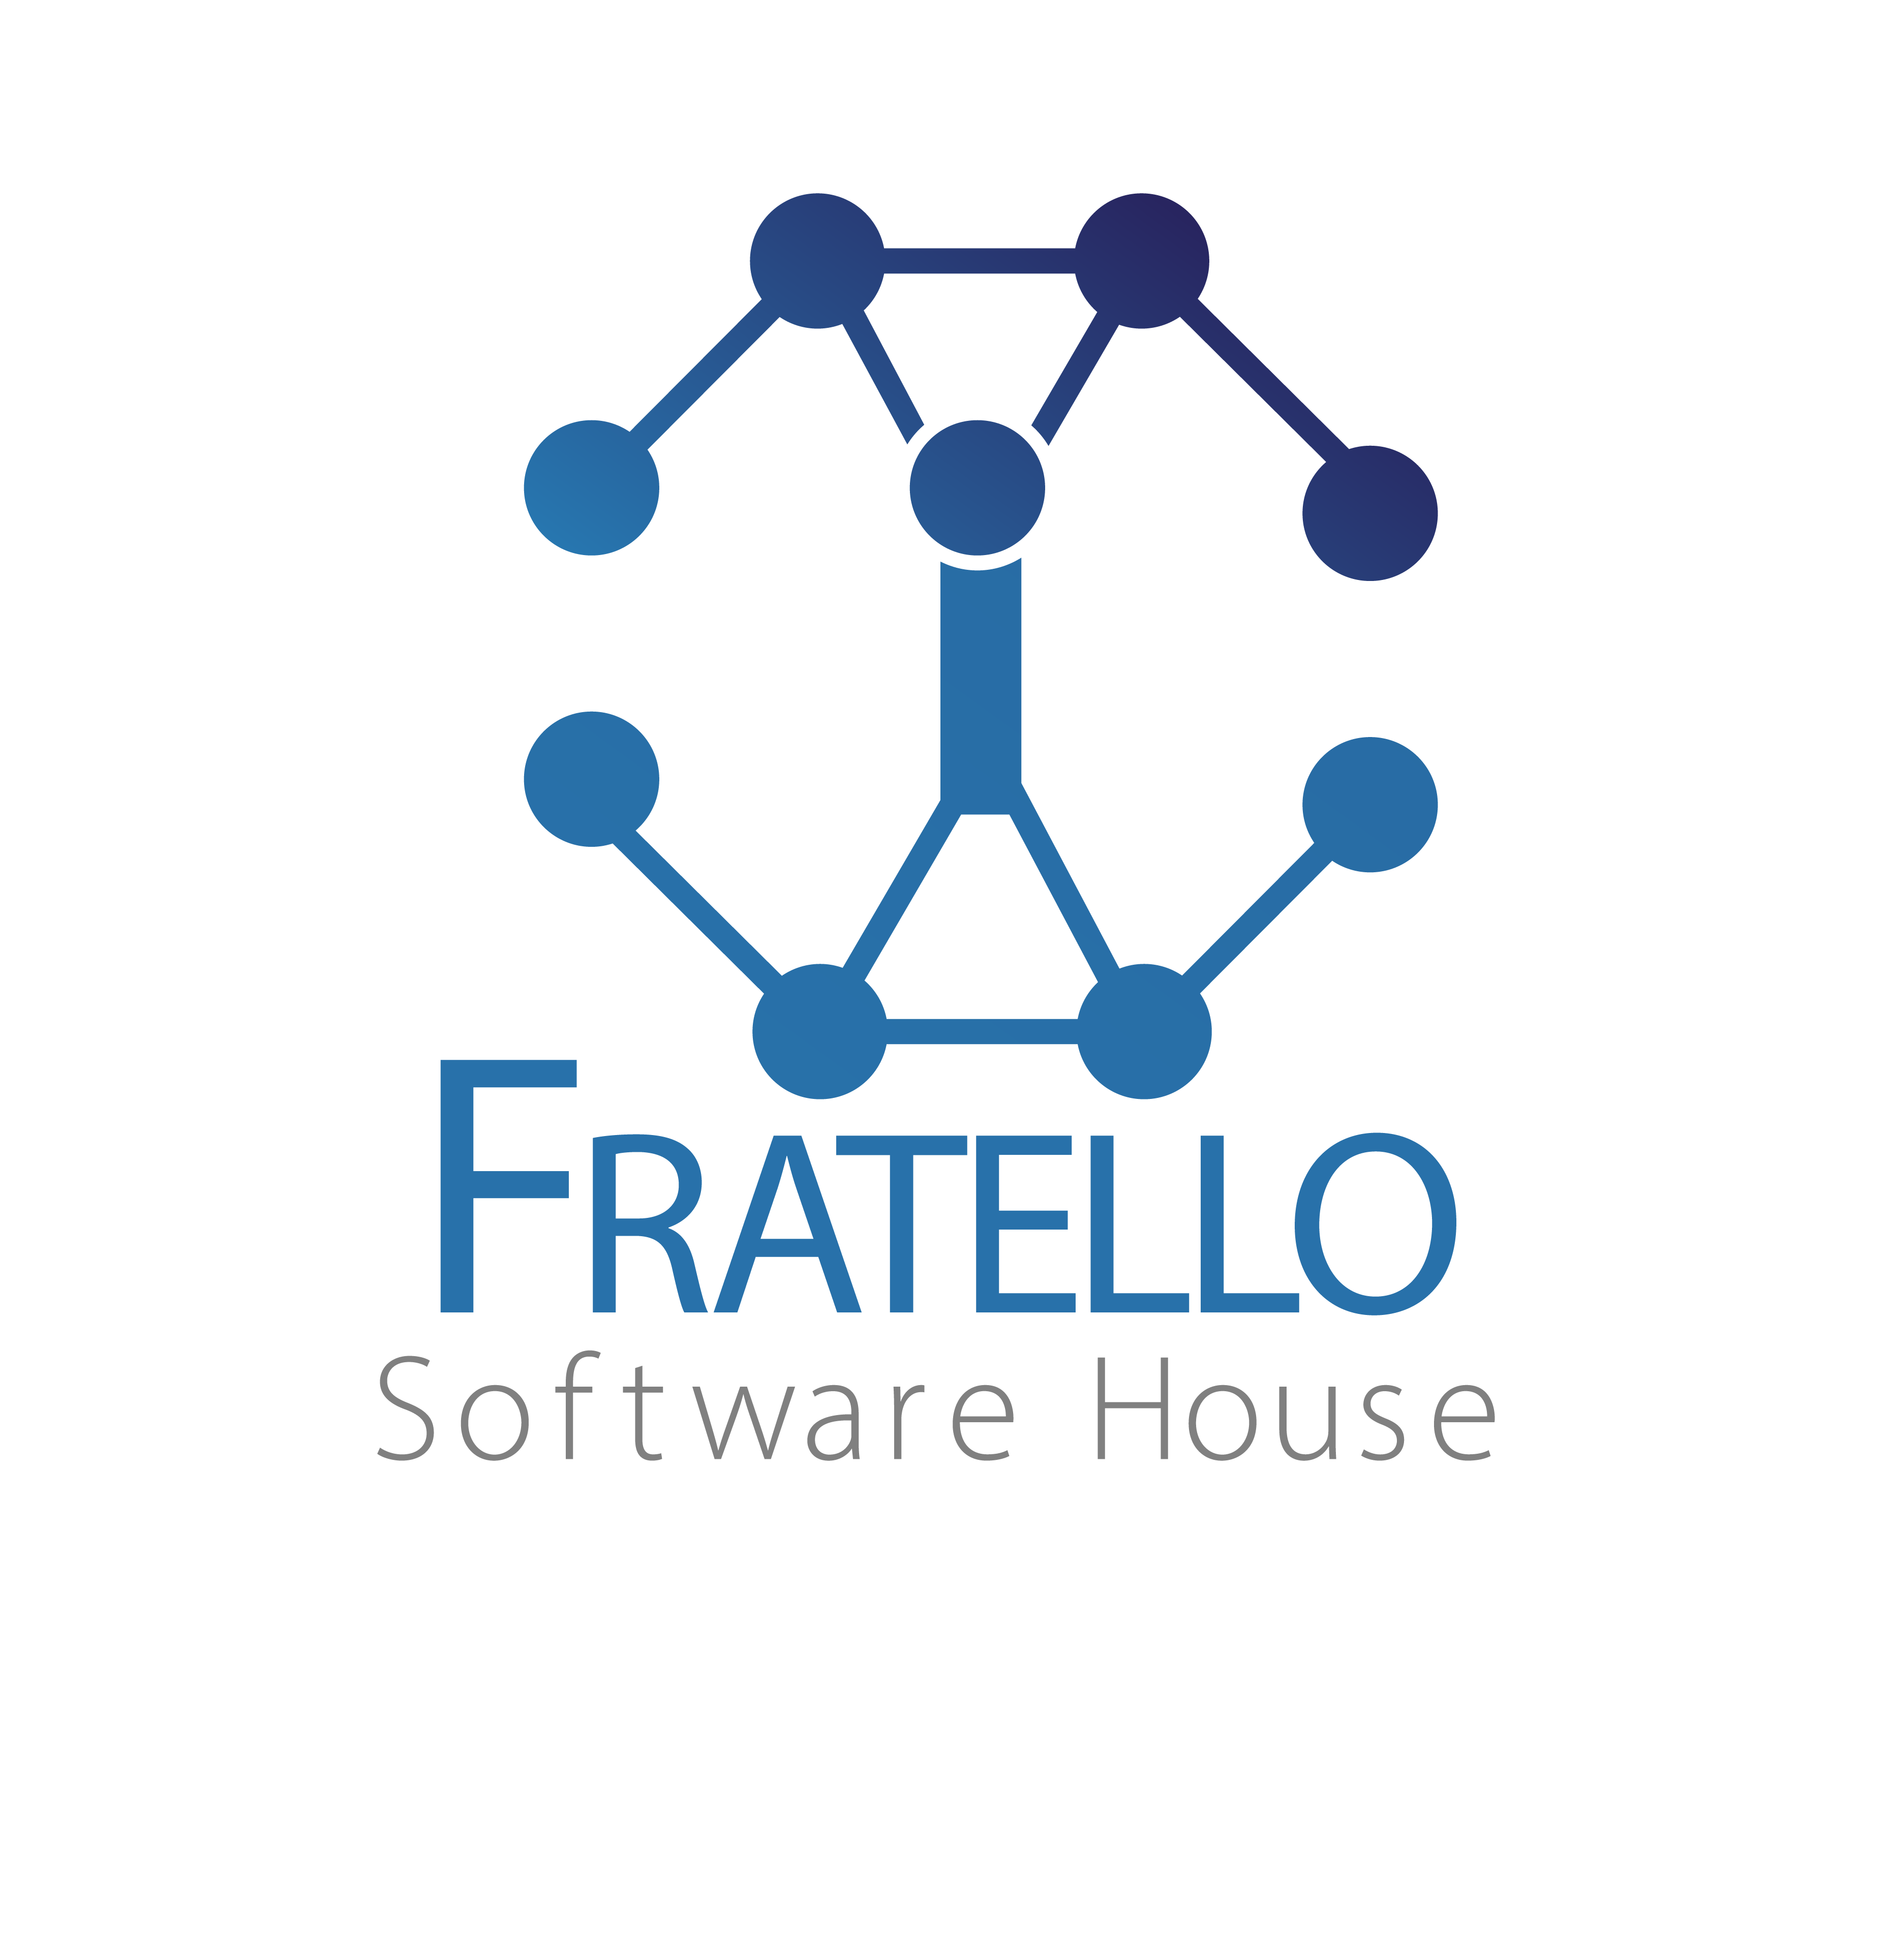 Fratello Software House